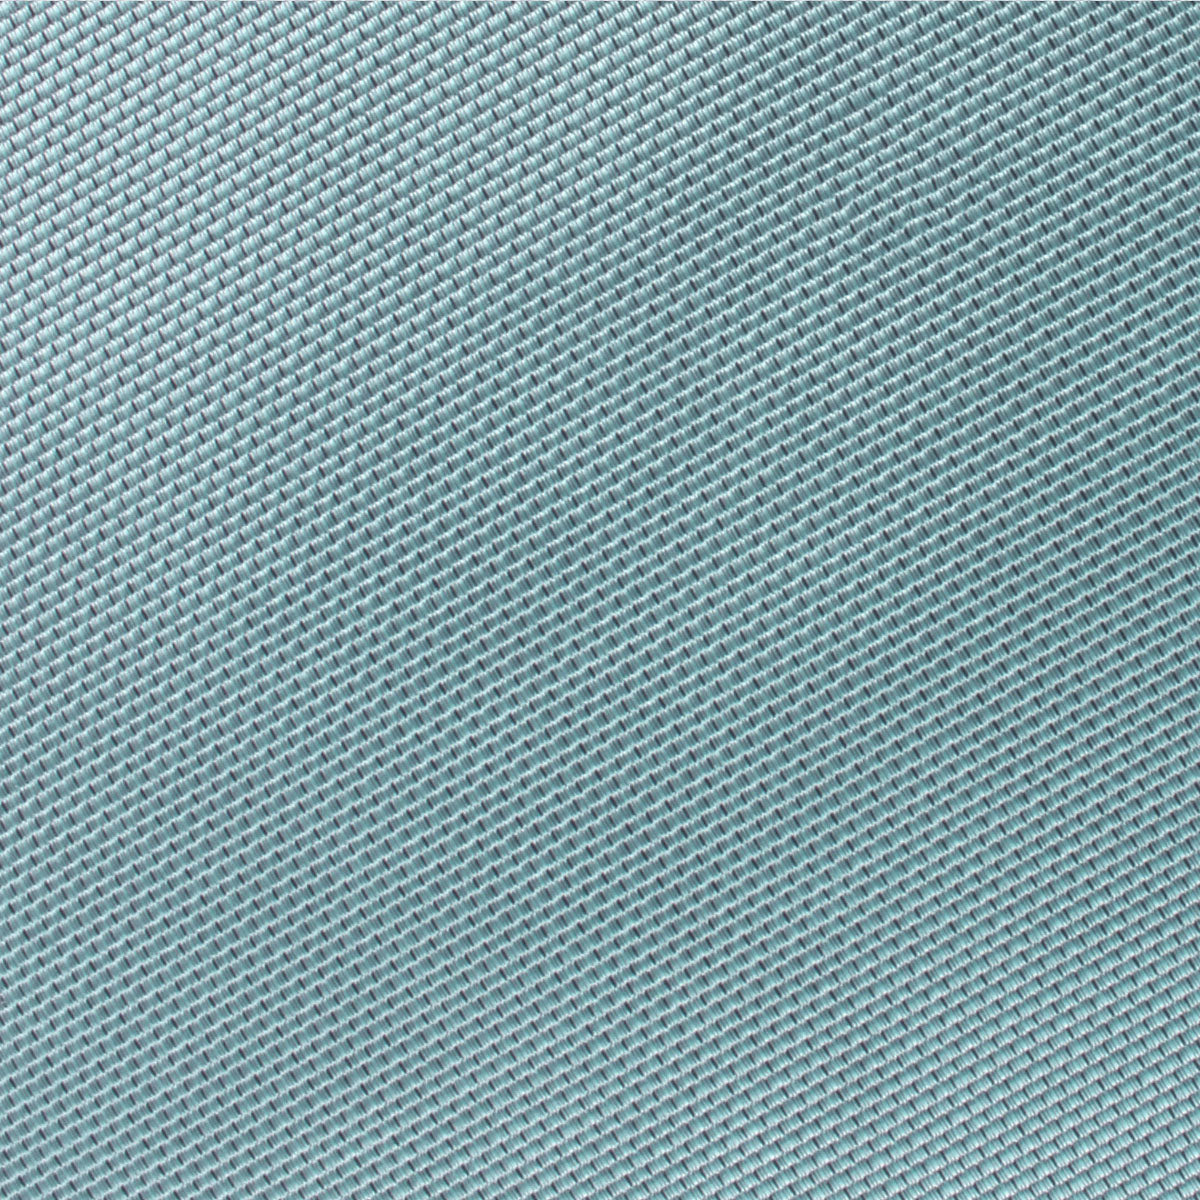 Turkish Teal Blue Weave Self Bow Tie Fabric